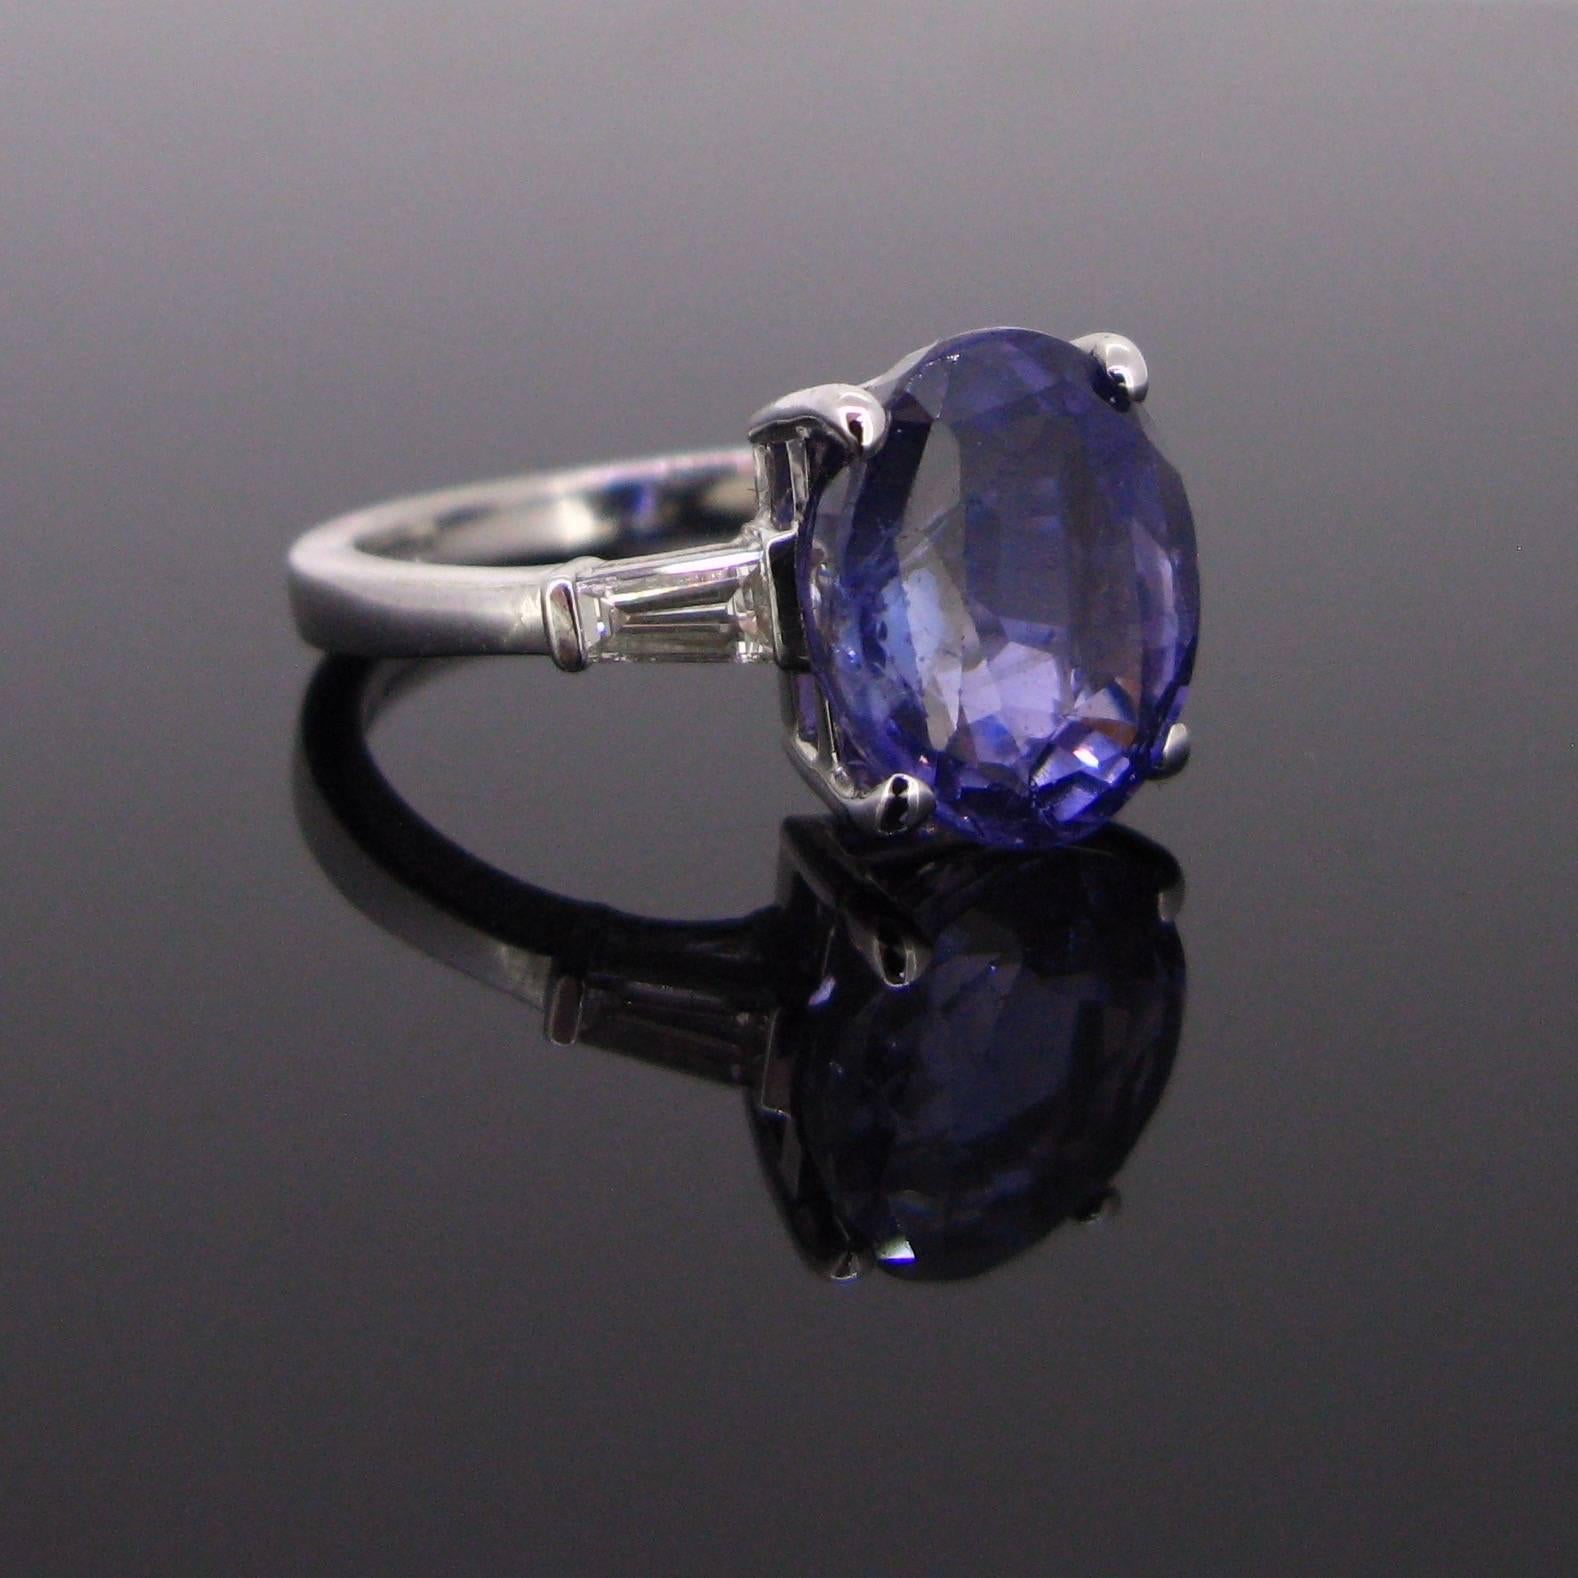 This beautiful band ring is set with a beautiful and a rare Sapphire colour change weighing approximately 7.44ct. It comes with a GCS certificate. The colors tones vary to blue under the daylight to purple in incandescent light. It is shouldered